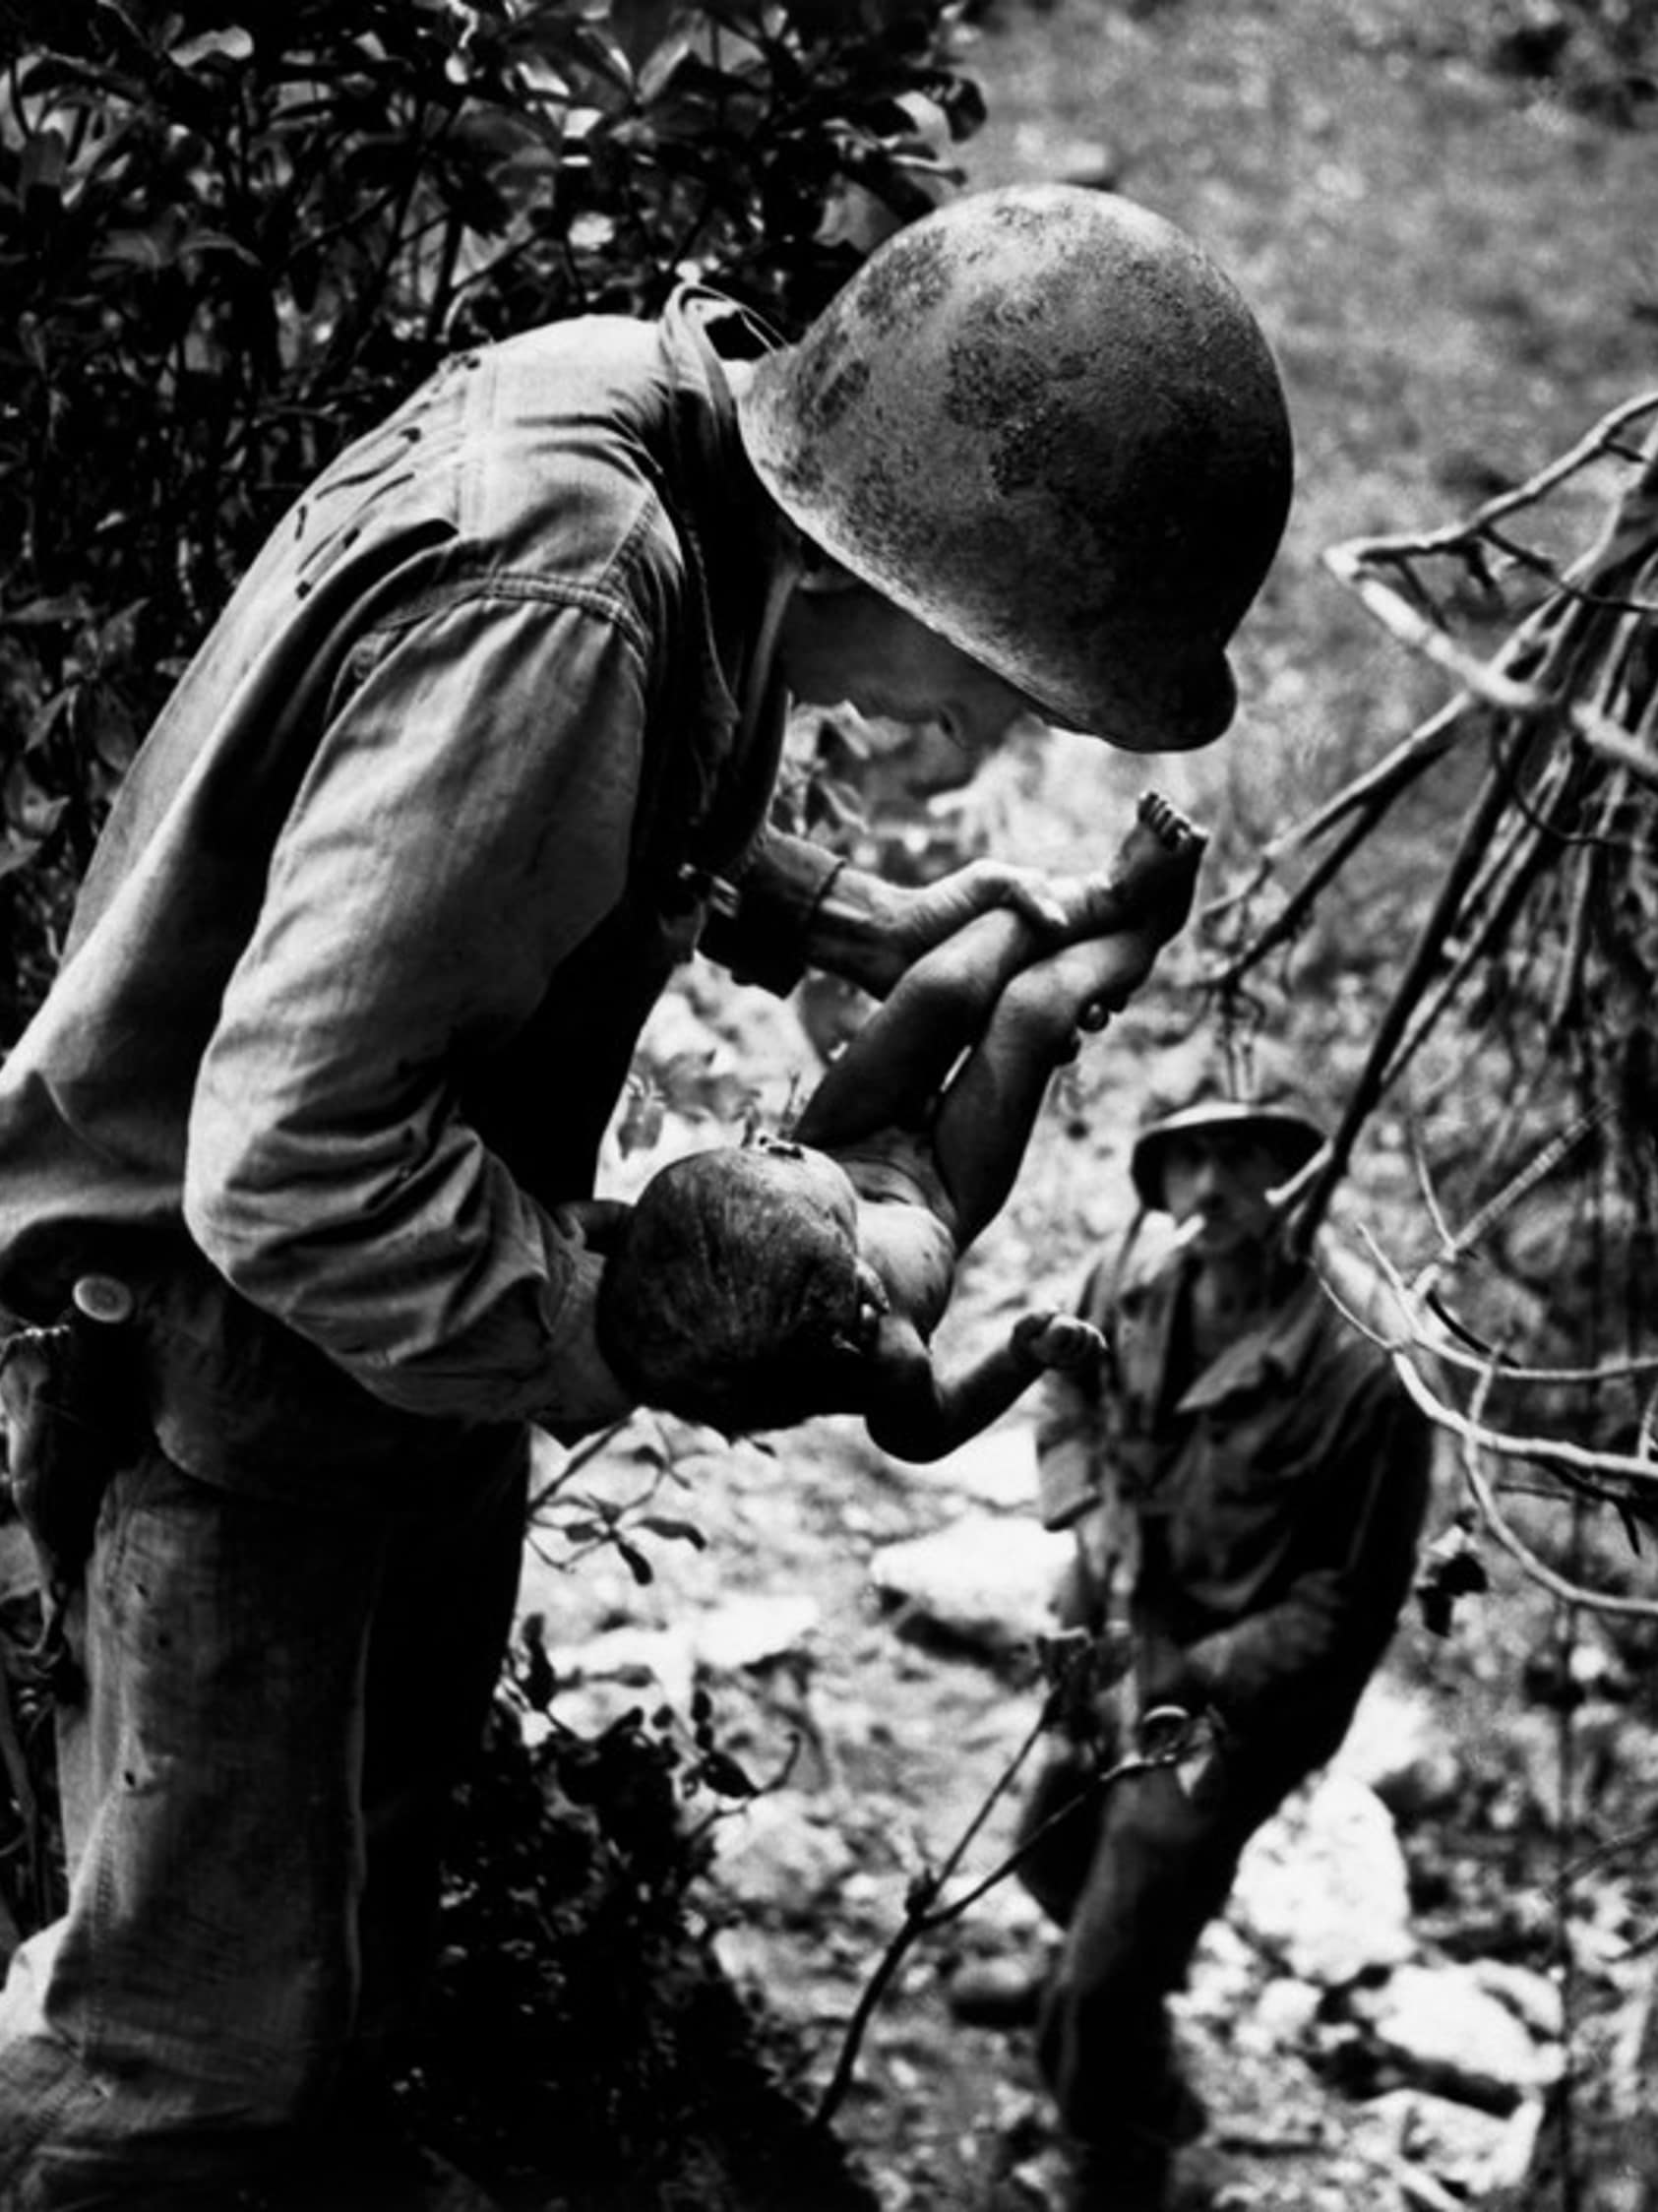 w. eugene smith the battle of saipan island US marine holding and dying baby found in the mountains 1944